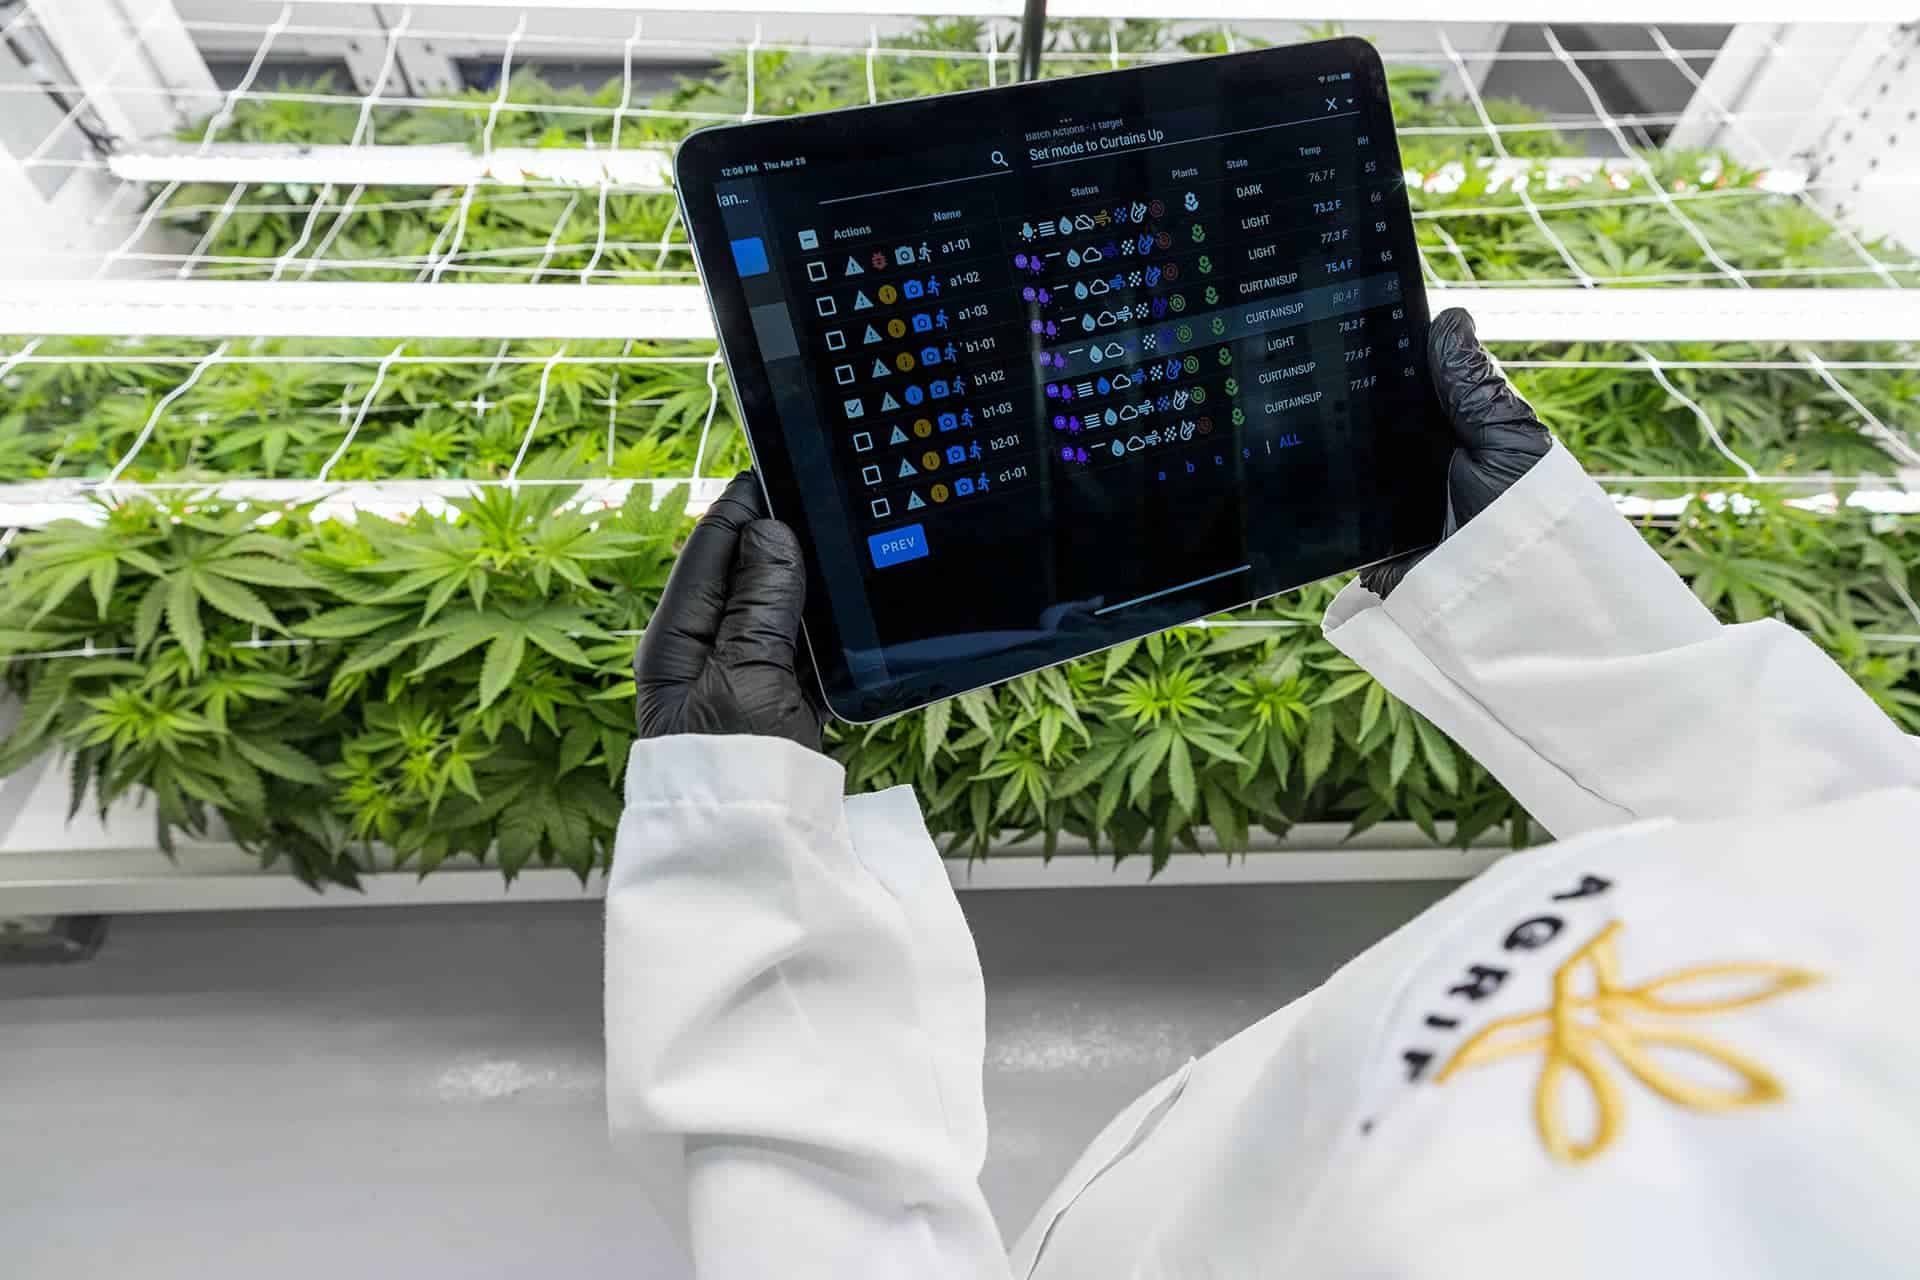 Featured image for “Agrify enters highly attractive New Zealand cannabis market”